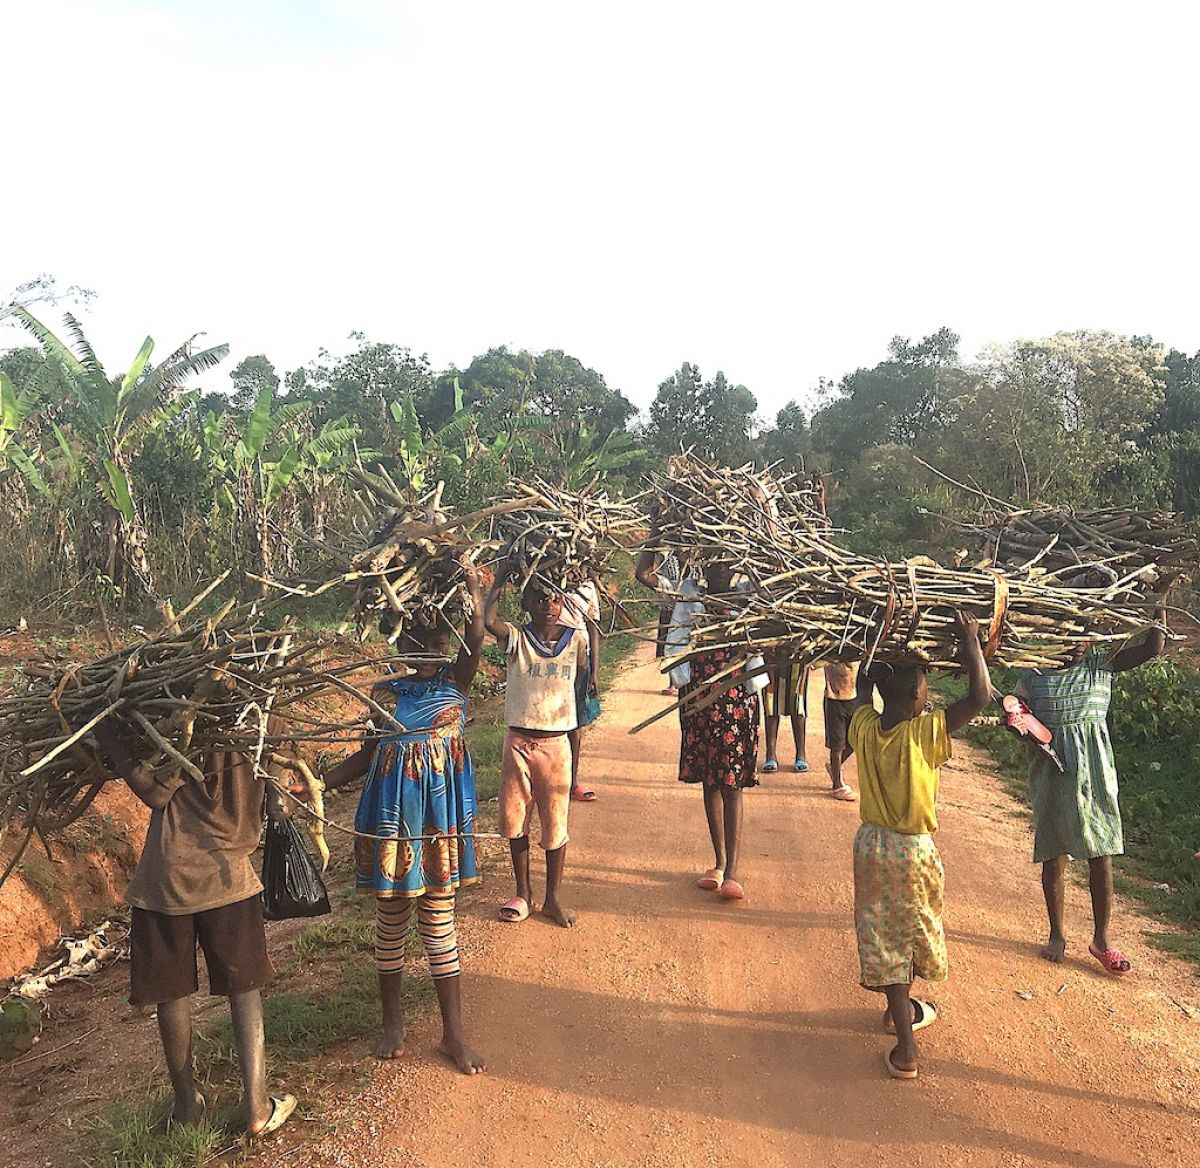 Success stories from Mubende - children collecting firewood - there is safety in numbers